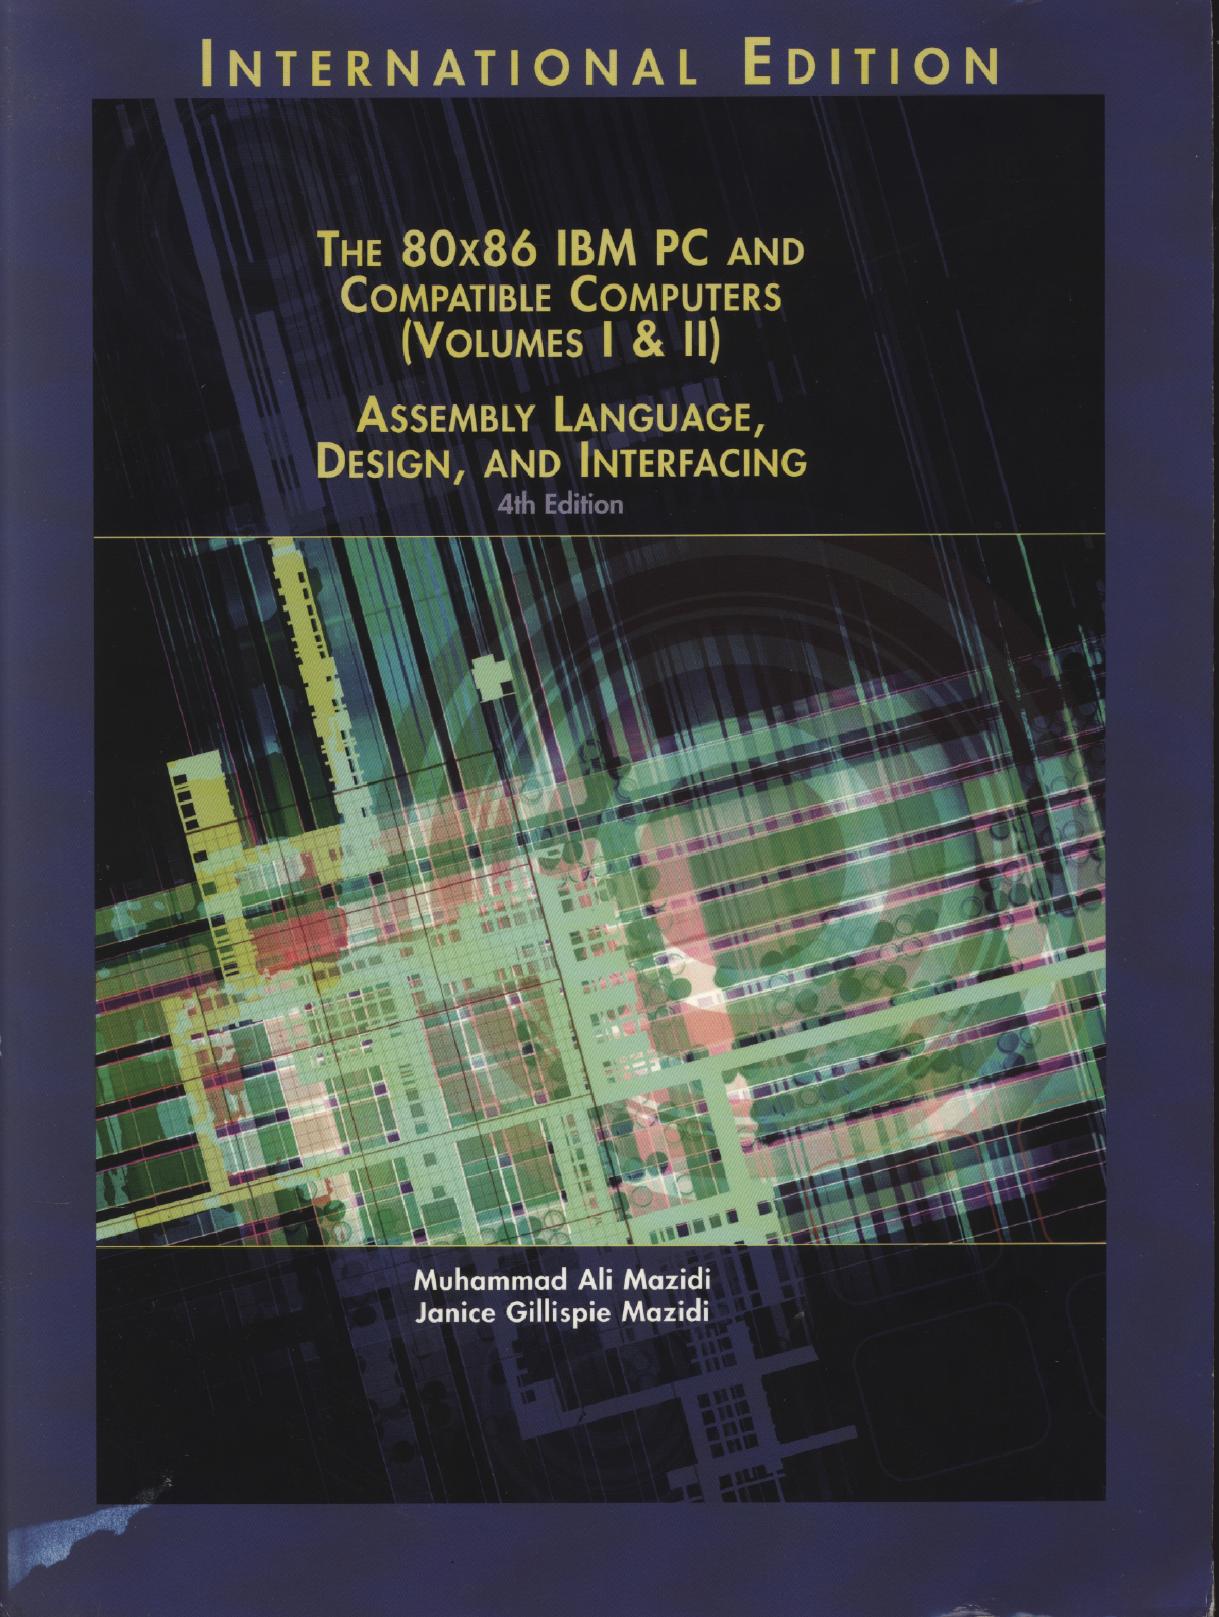 80X86 IBM PC and Compatible Computers  Assembly Language, Design, and Interfacing  Volumes I & II-Prentice Hall (2002)